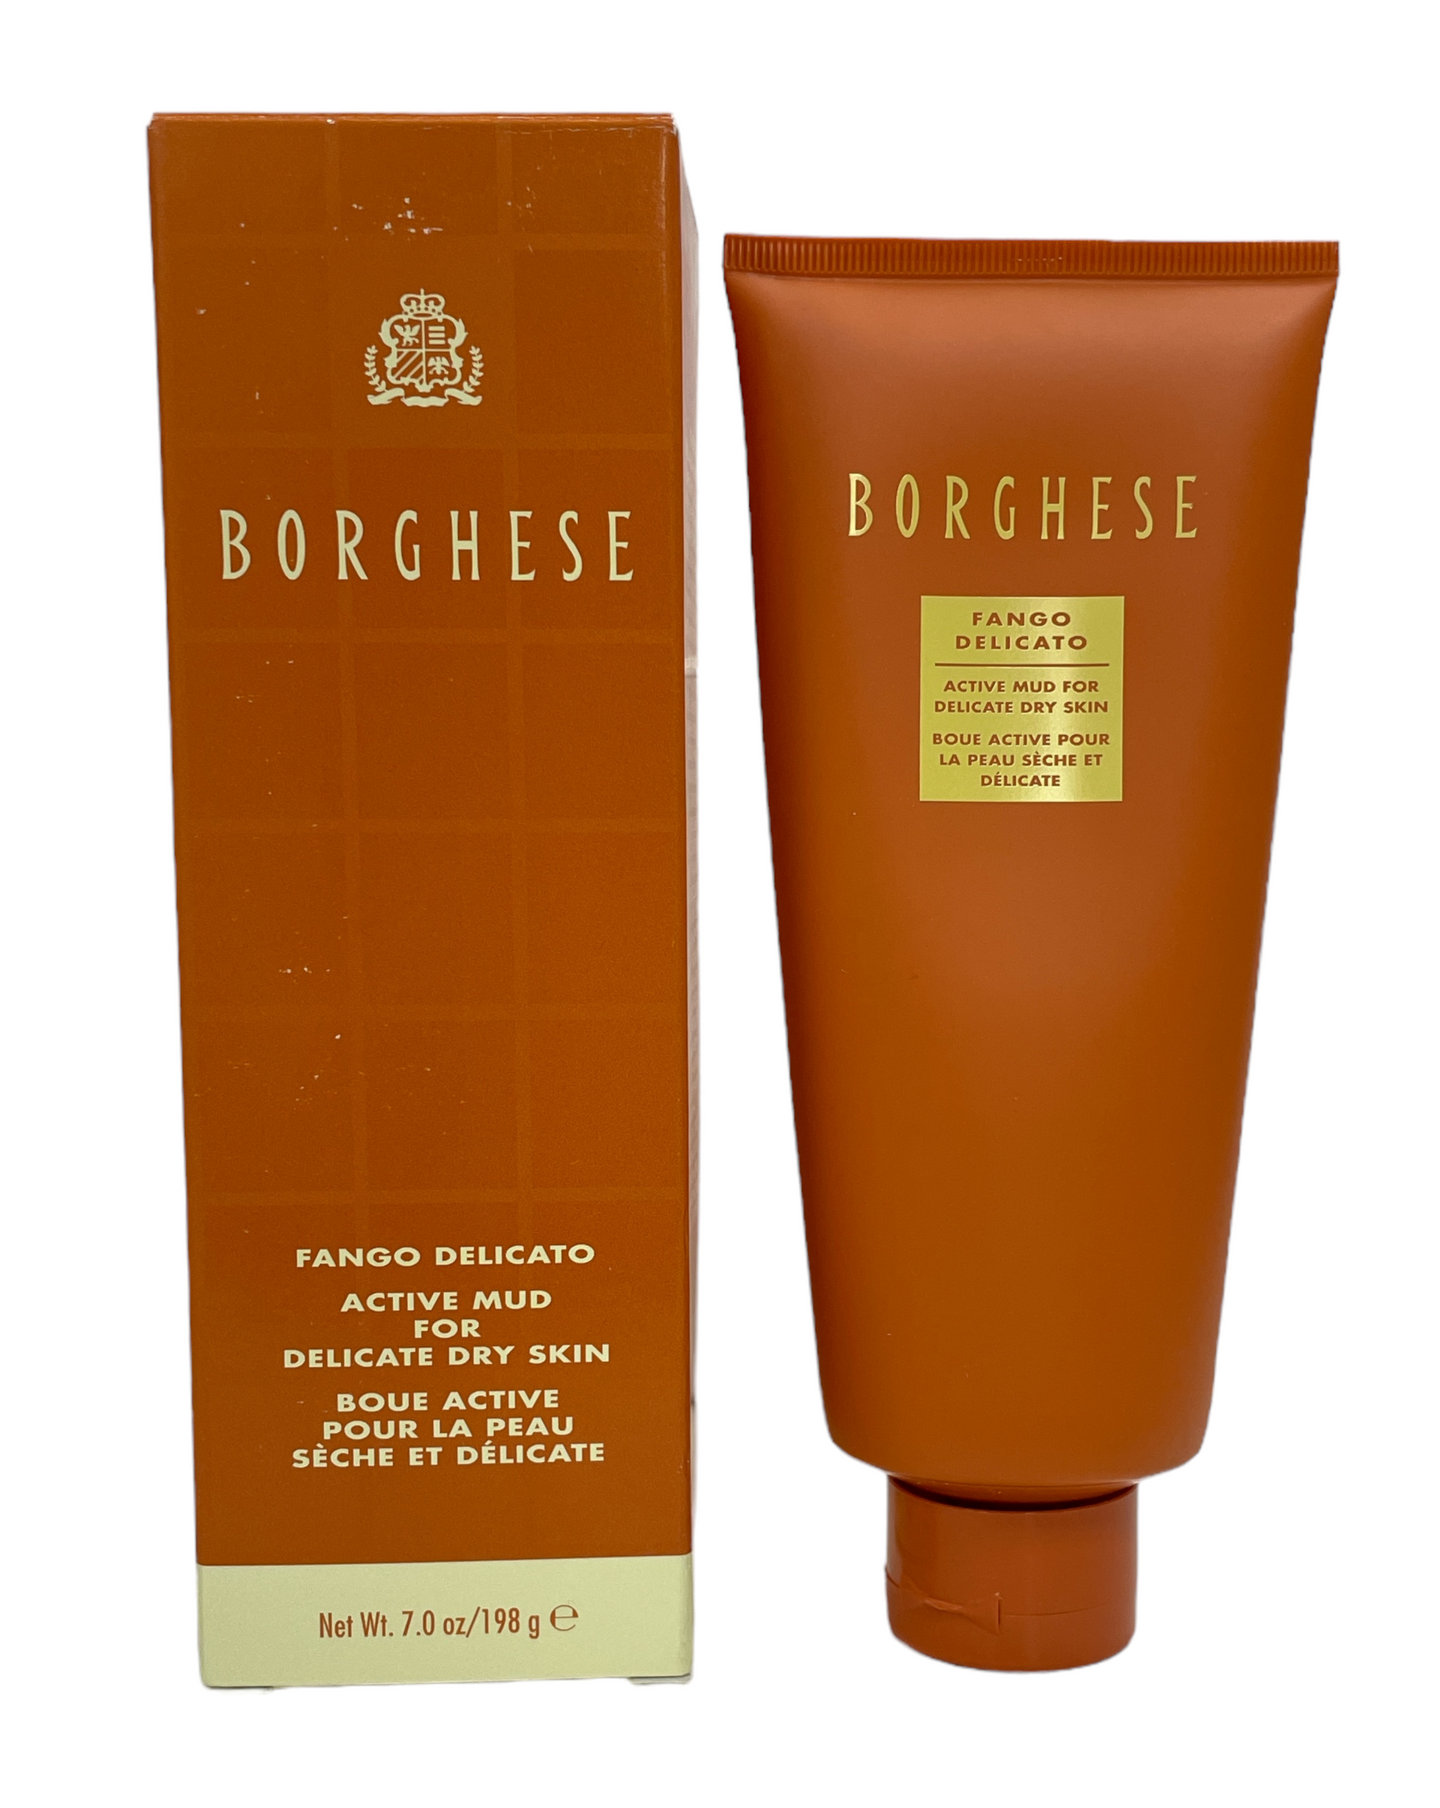 Borghese Active Mud For Delicate Dry Skin (7.0oz / 198g)